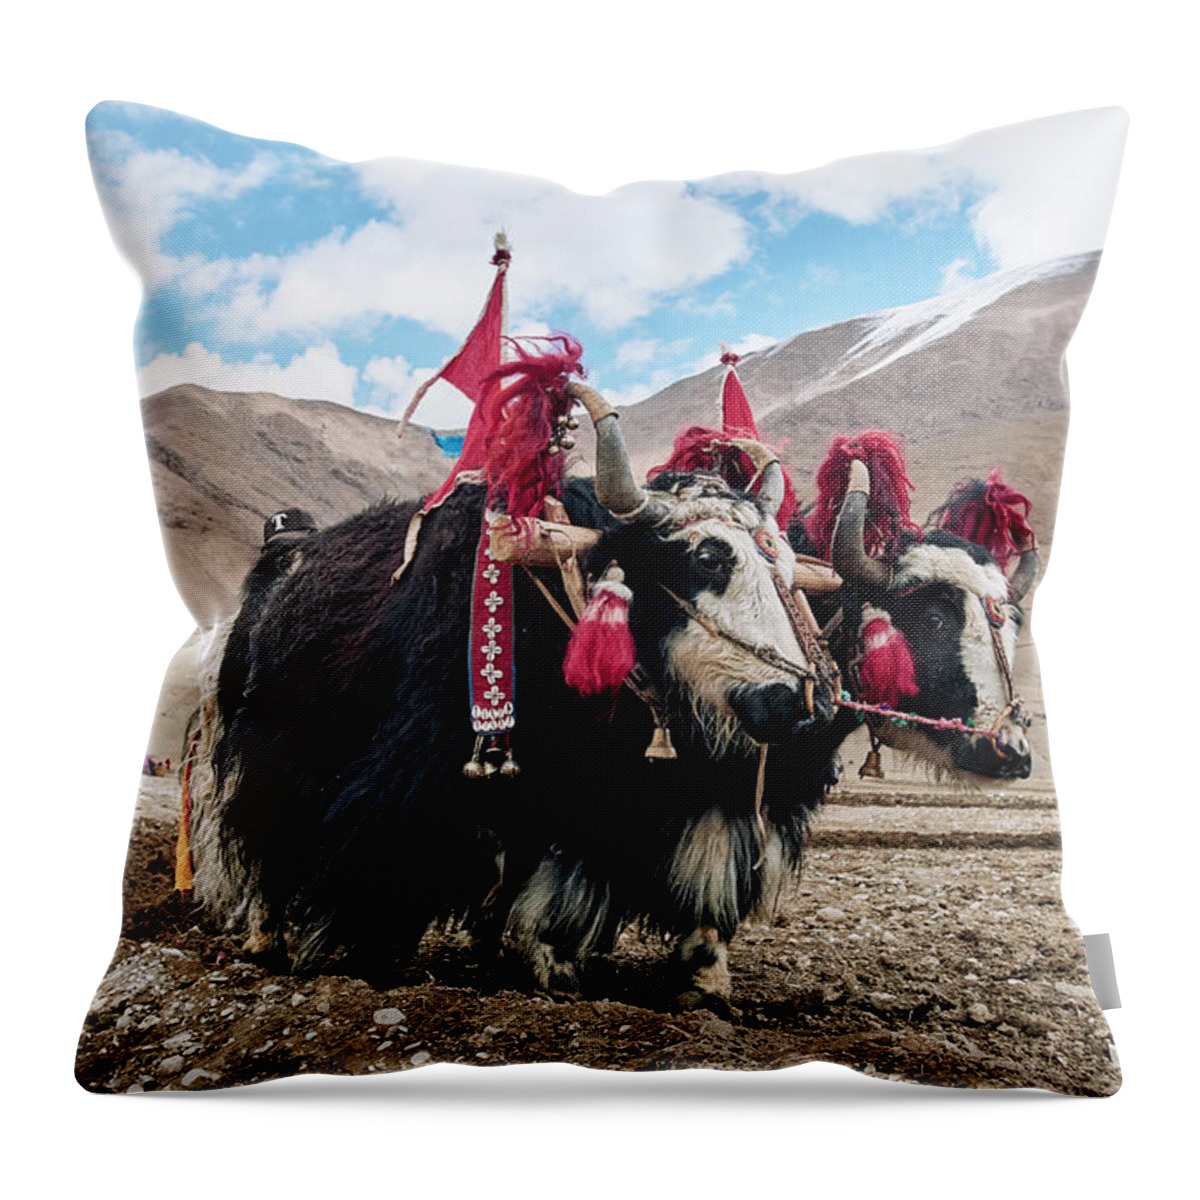 Dressing Up Throw Pillow featuring the digital art Yaks Dressed Up To Work On Field, Namco, Xizang, China by Gu